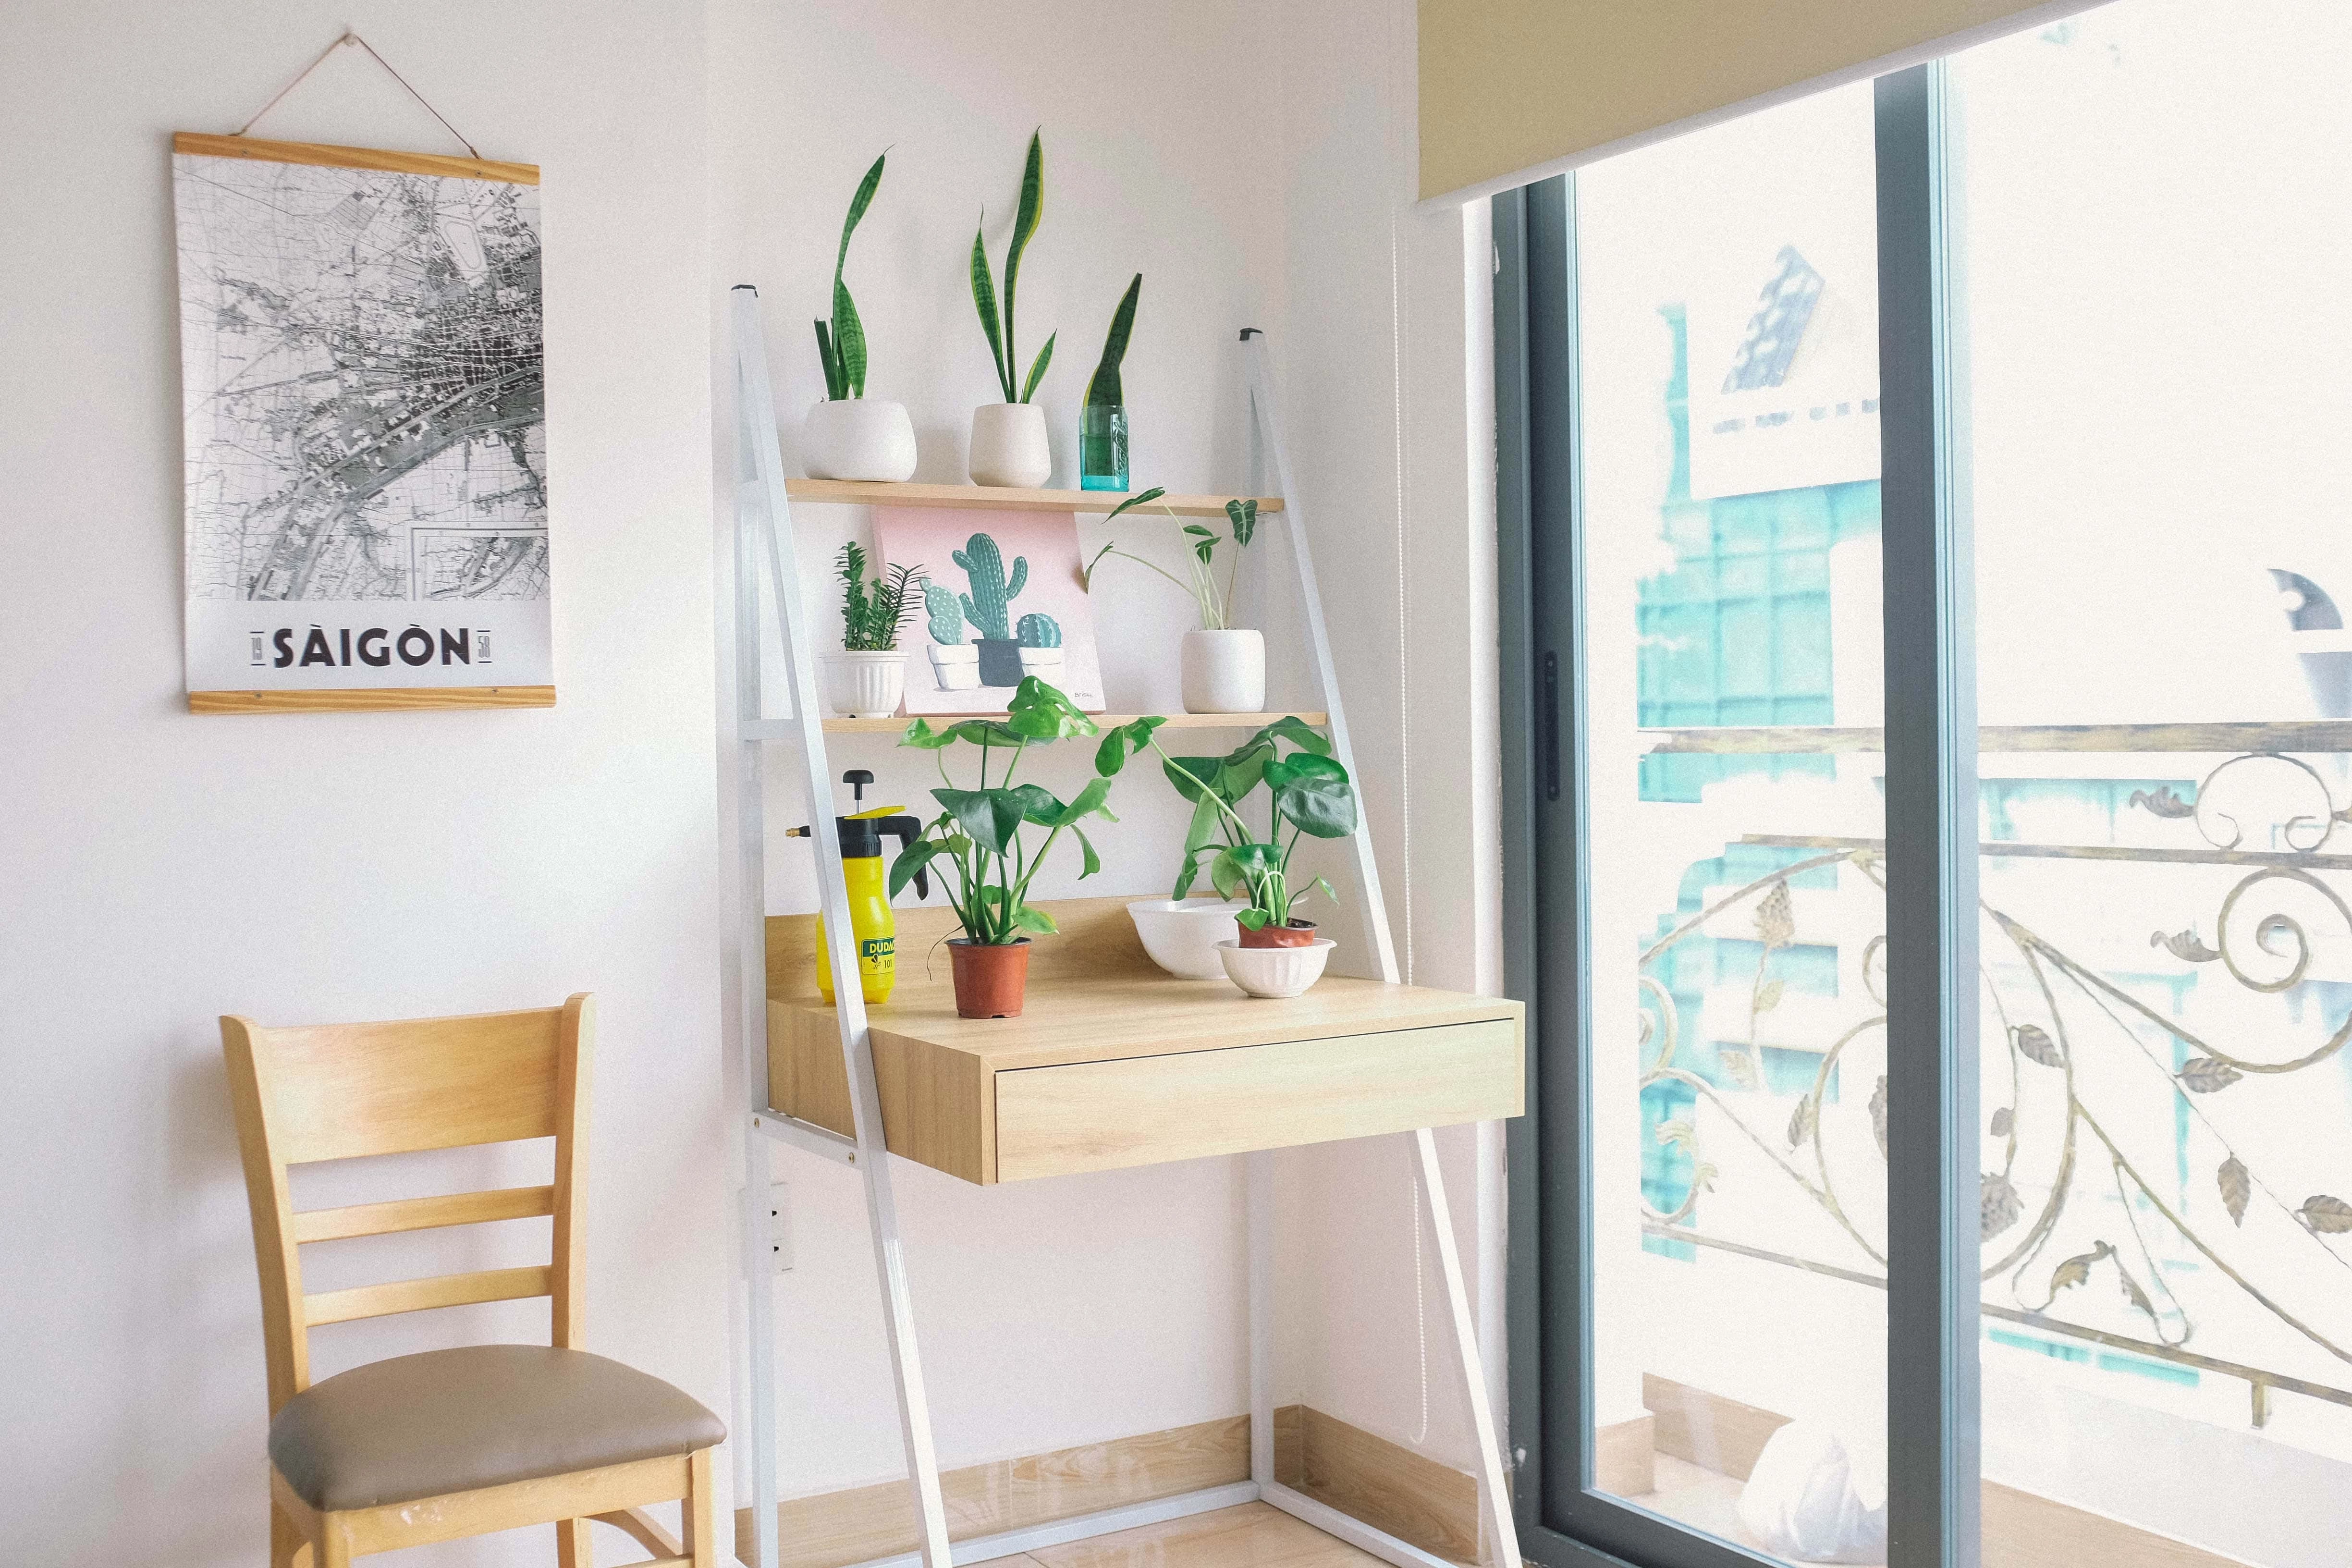 Bright, clean room with lots of plants on a desk and a Saigon print